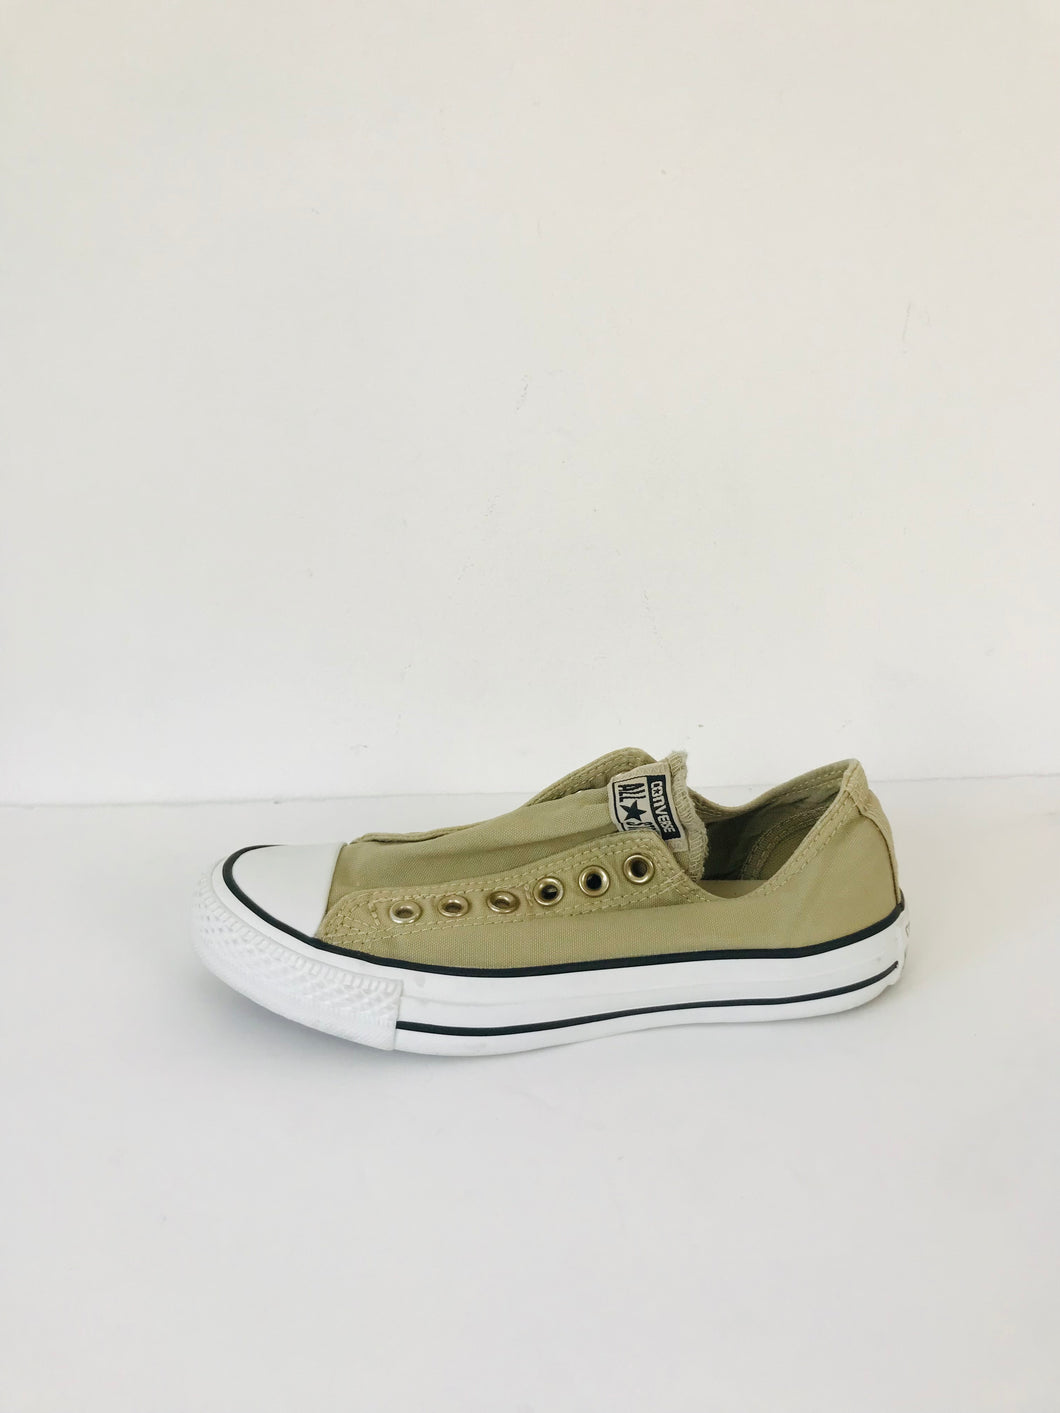 Converse All Star Women's Slip-On Canvas Low Trainers | UK5 | Beige